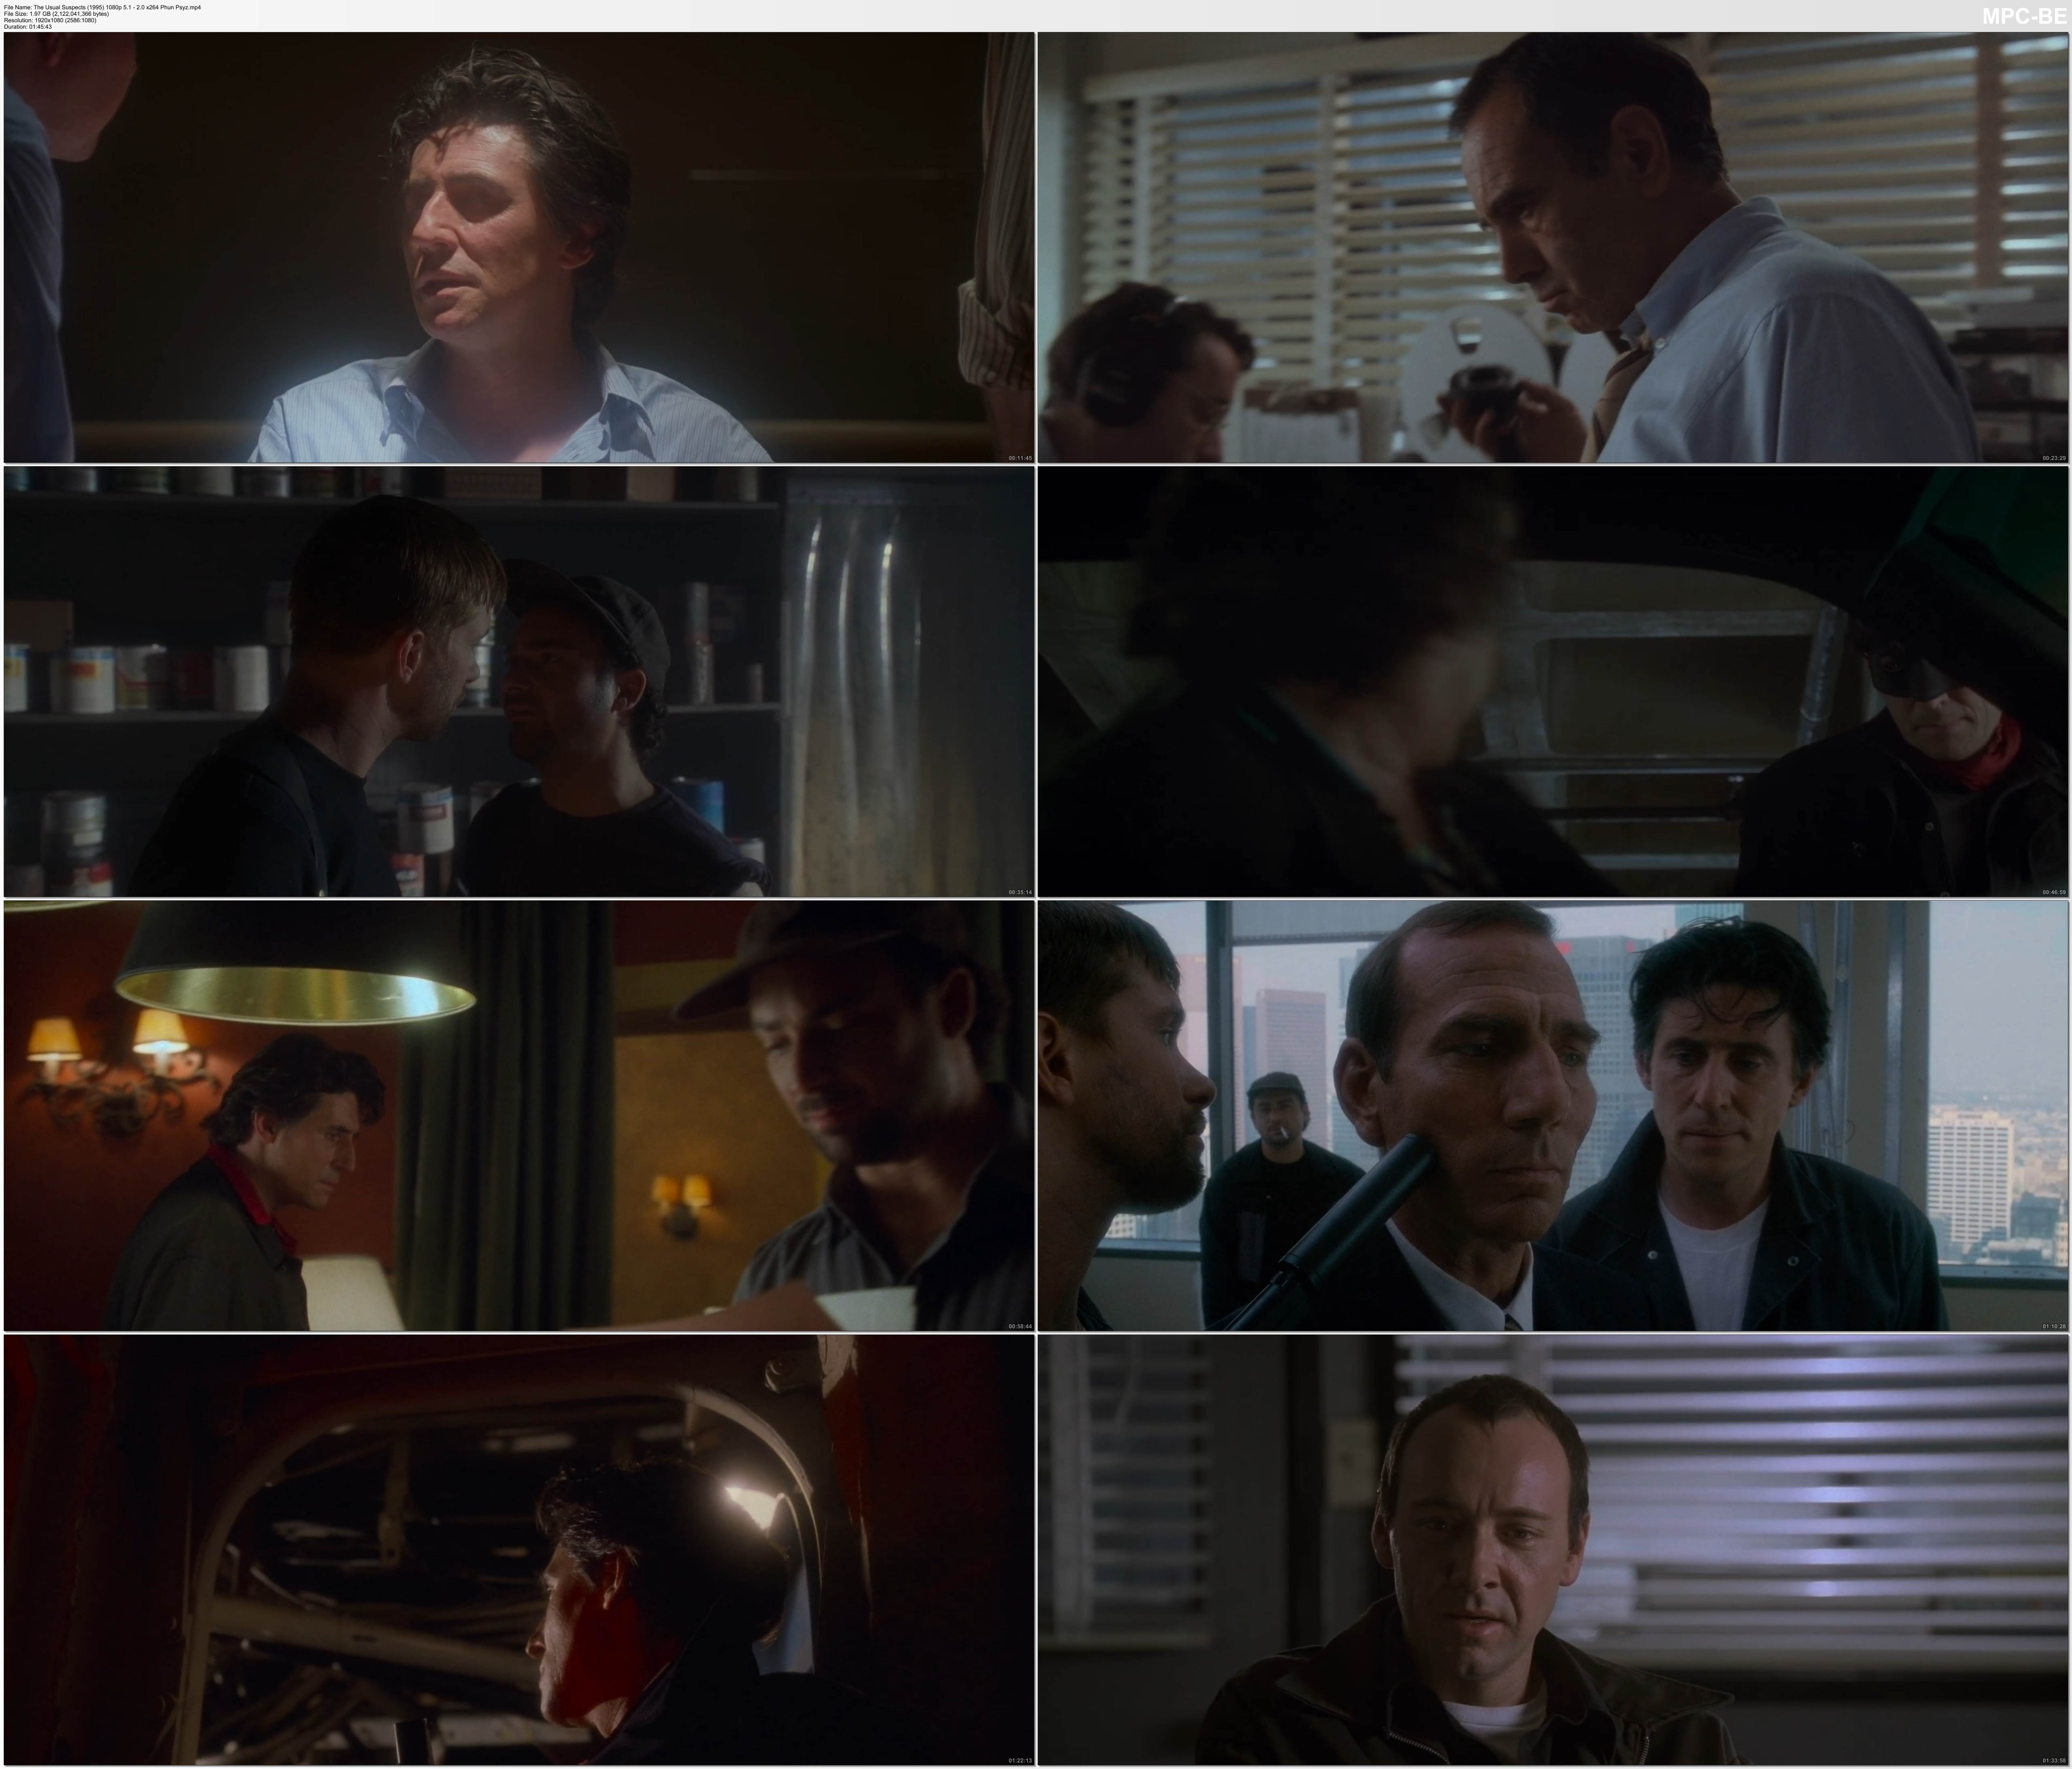 The Usual Suspects (1995) 1080p 5.1 - 2.0 x264 Phun Psyz